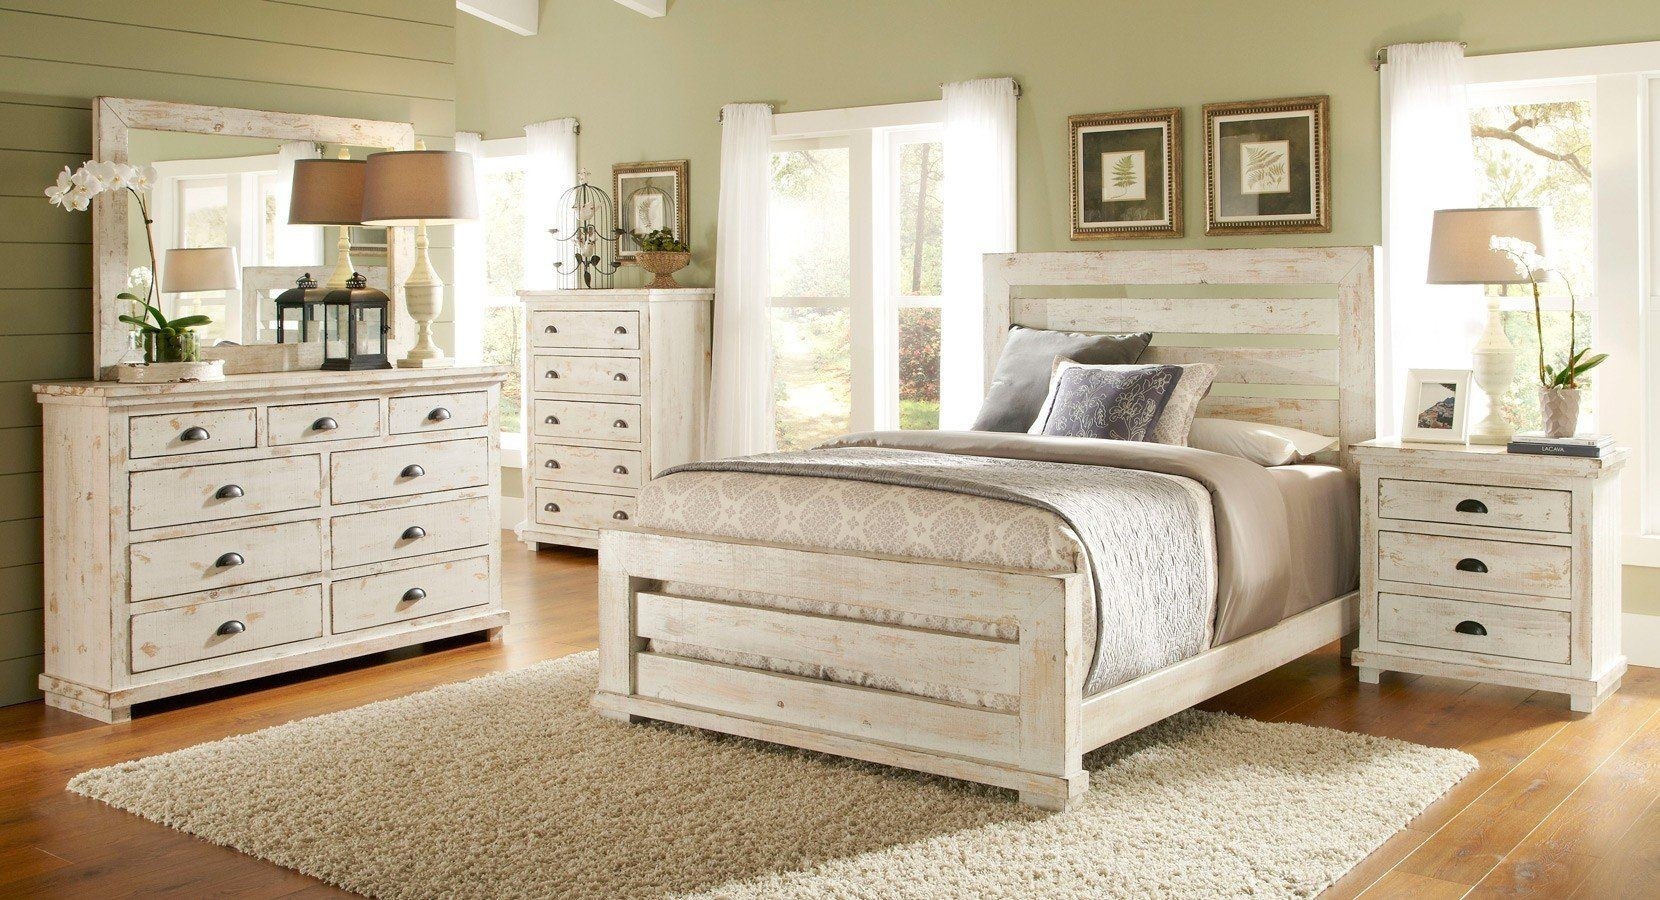 Willow slat bedroom set distressed white distressed